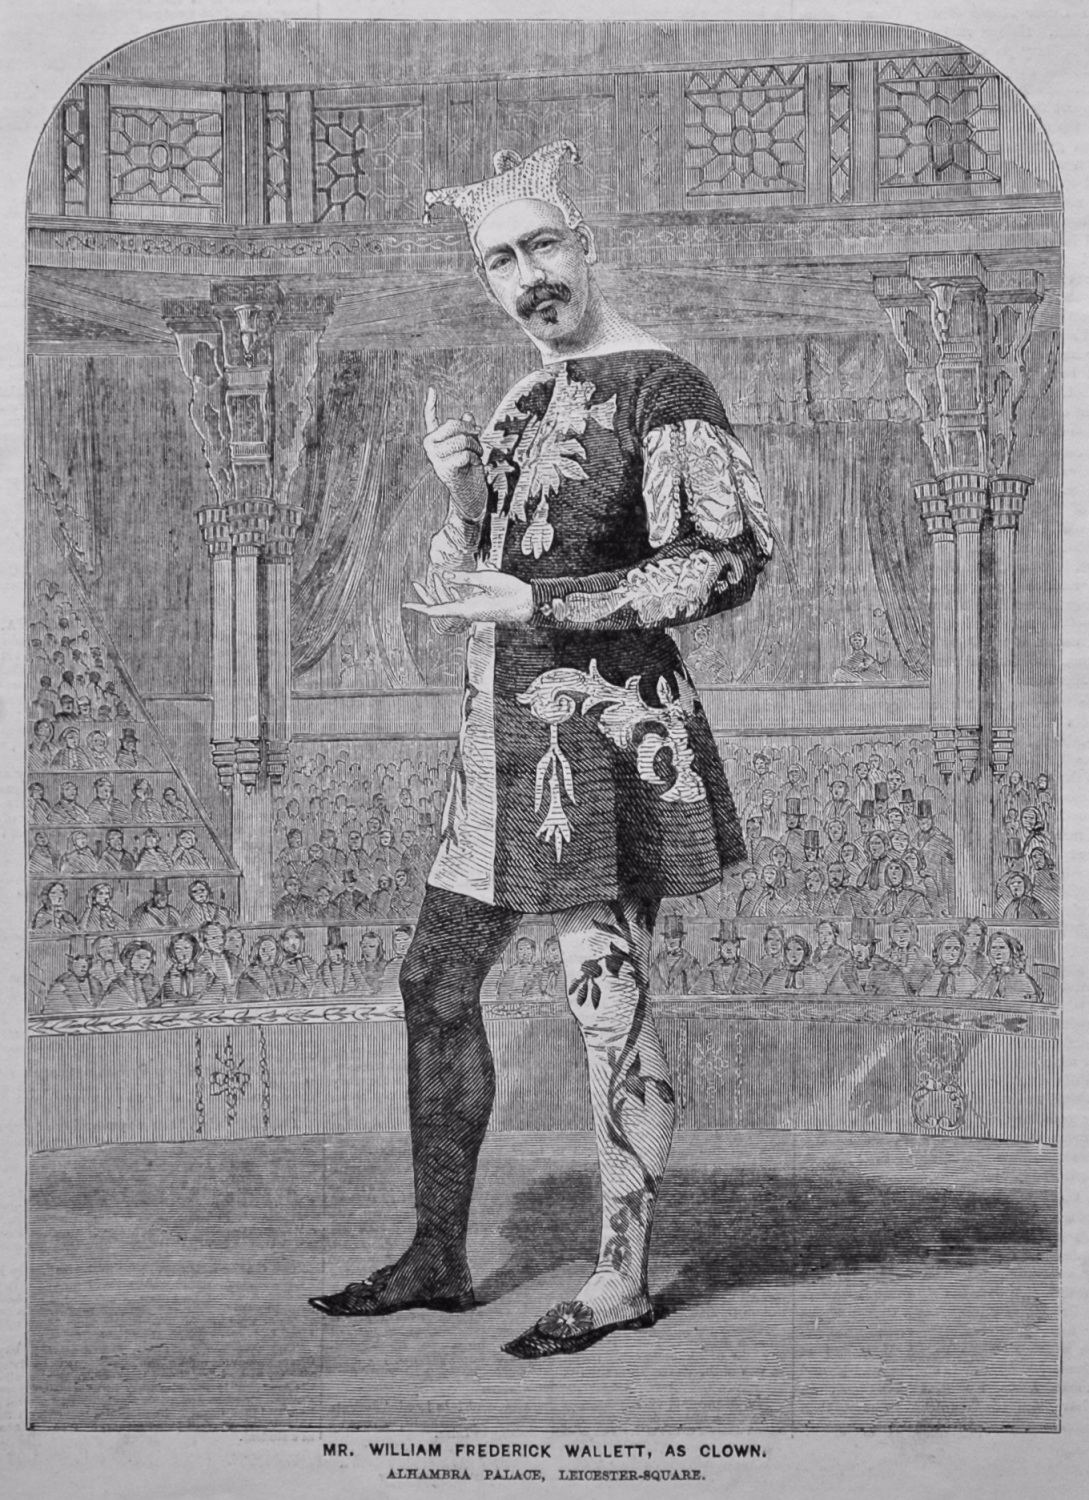 Mr. William Frederick Wallett, as Clown. Alhambra Palace, Leicester-Square.